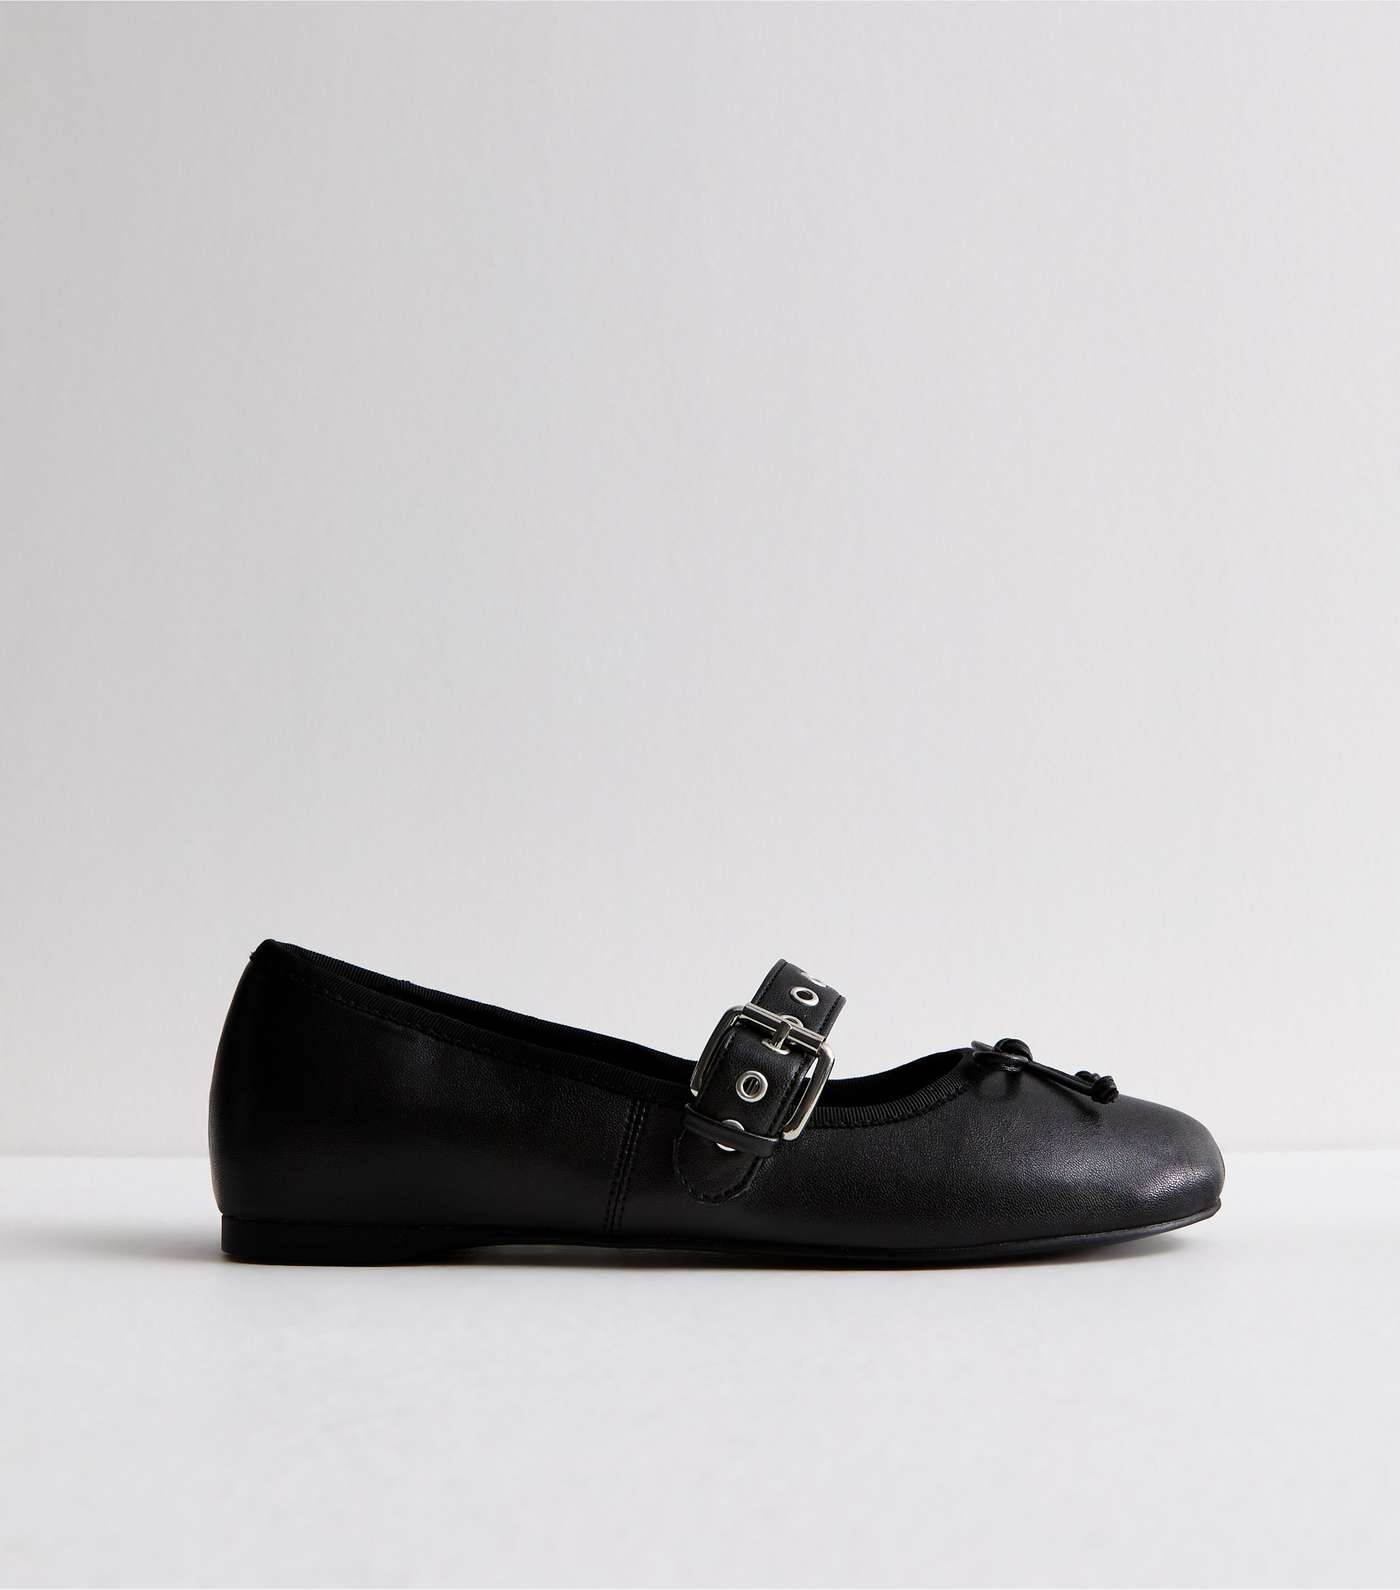 Black Leather-Look Strappy Mary Jane Ballerina Pumps Image 5